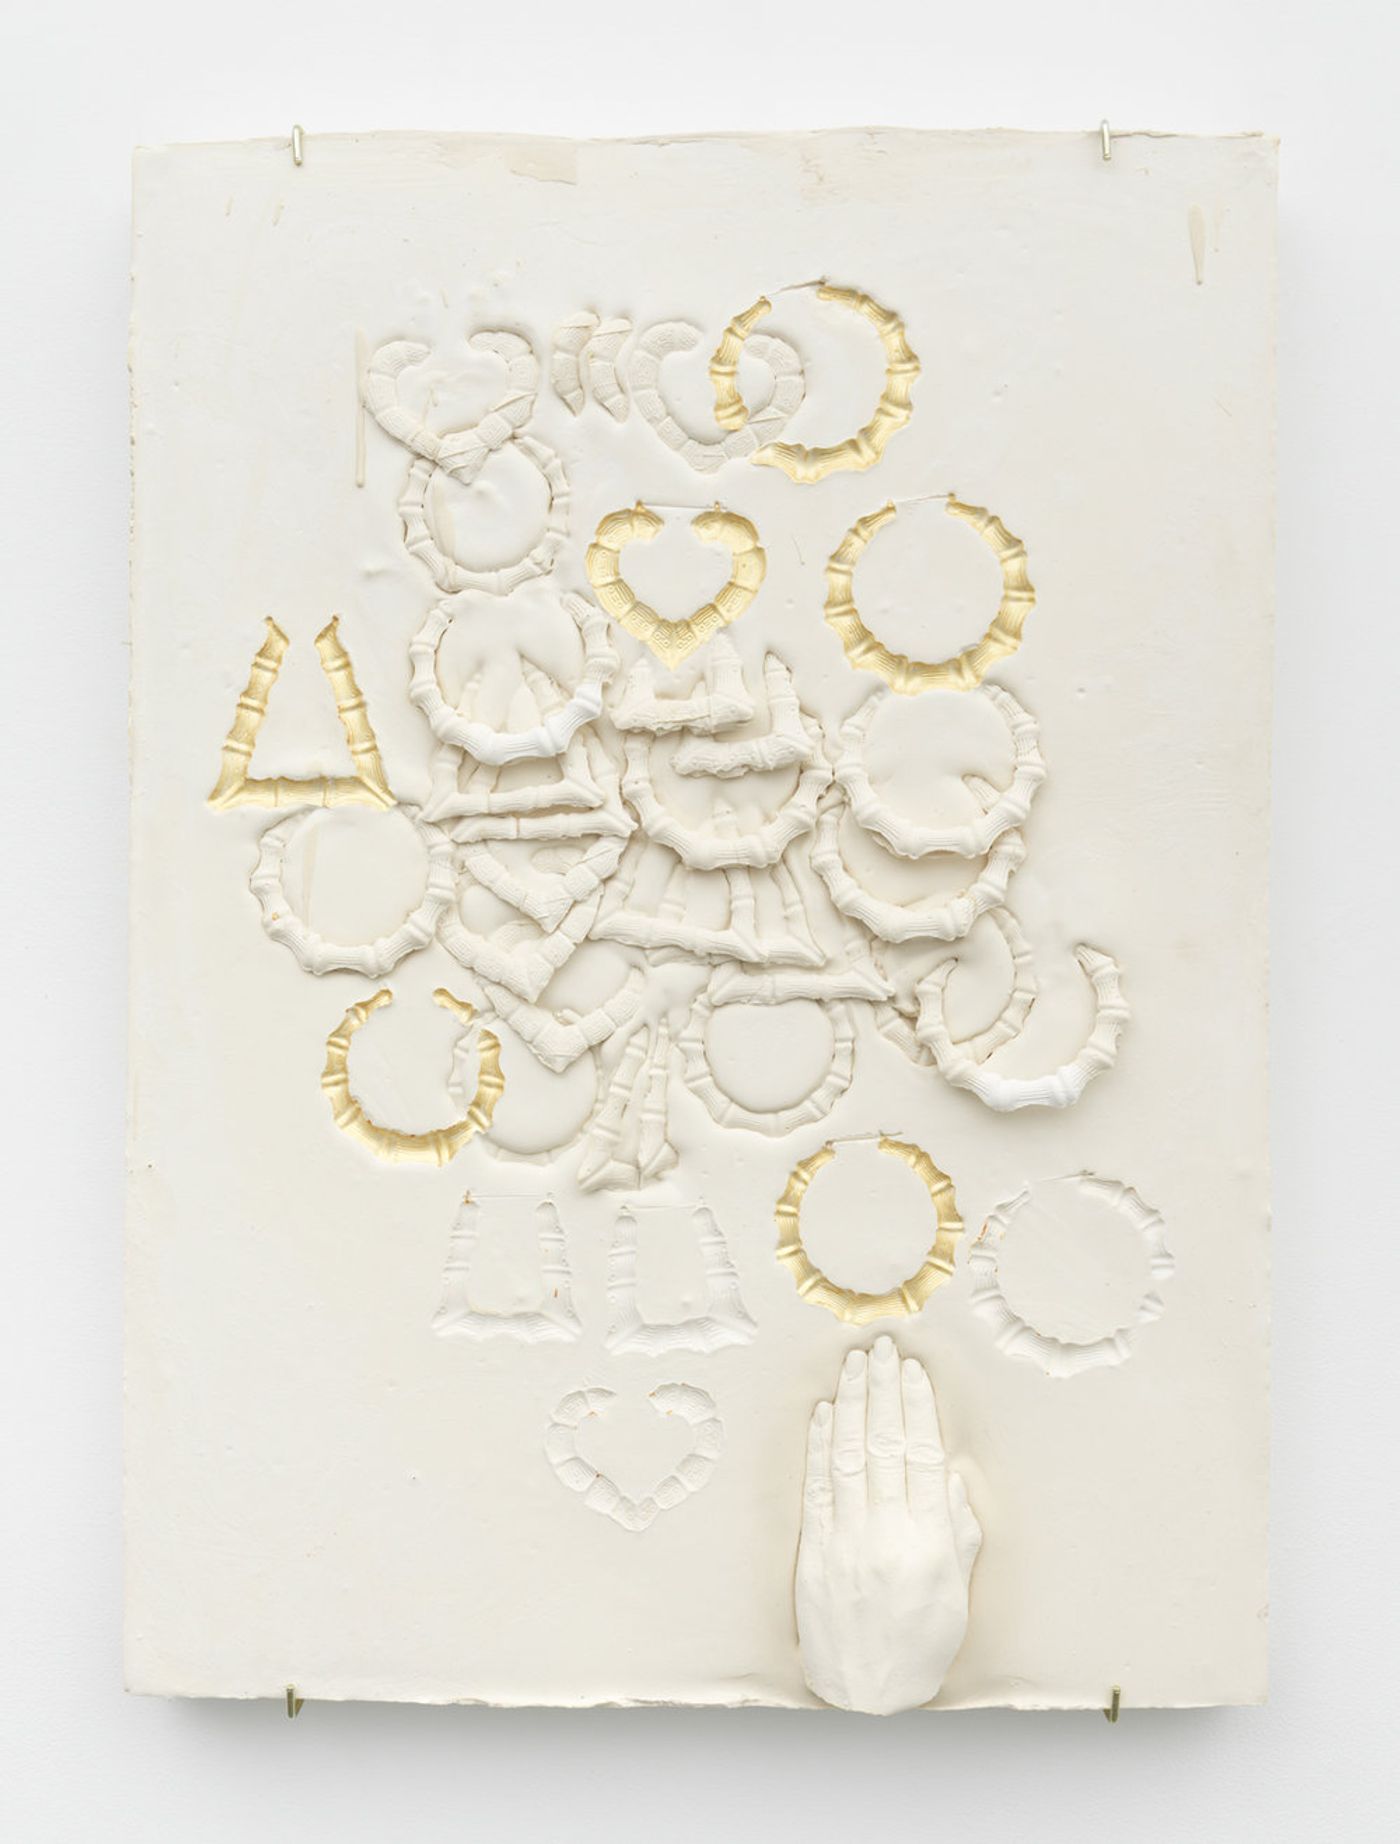 Image of Composition With Round Bamboo Earrings Overlapping, Impressed With Gold, 2019: Plaster, foam, and acrylic